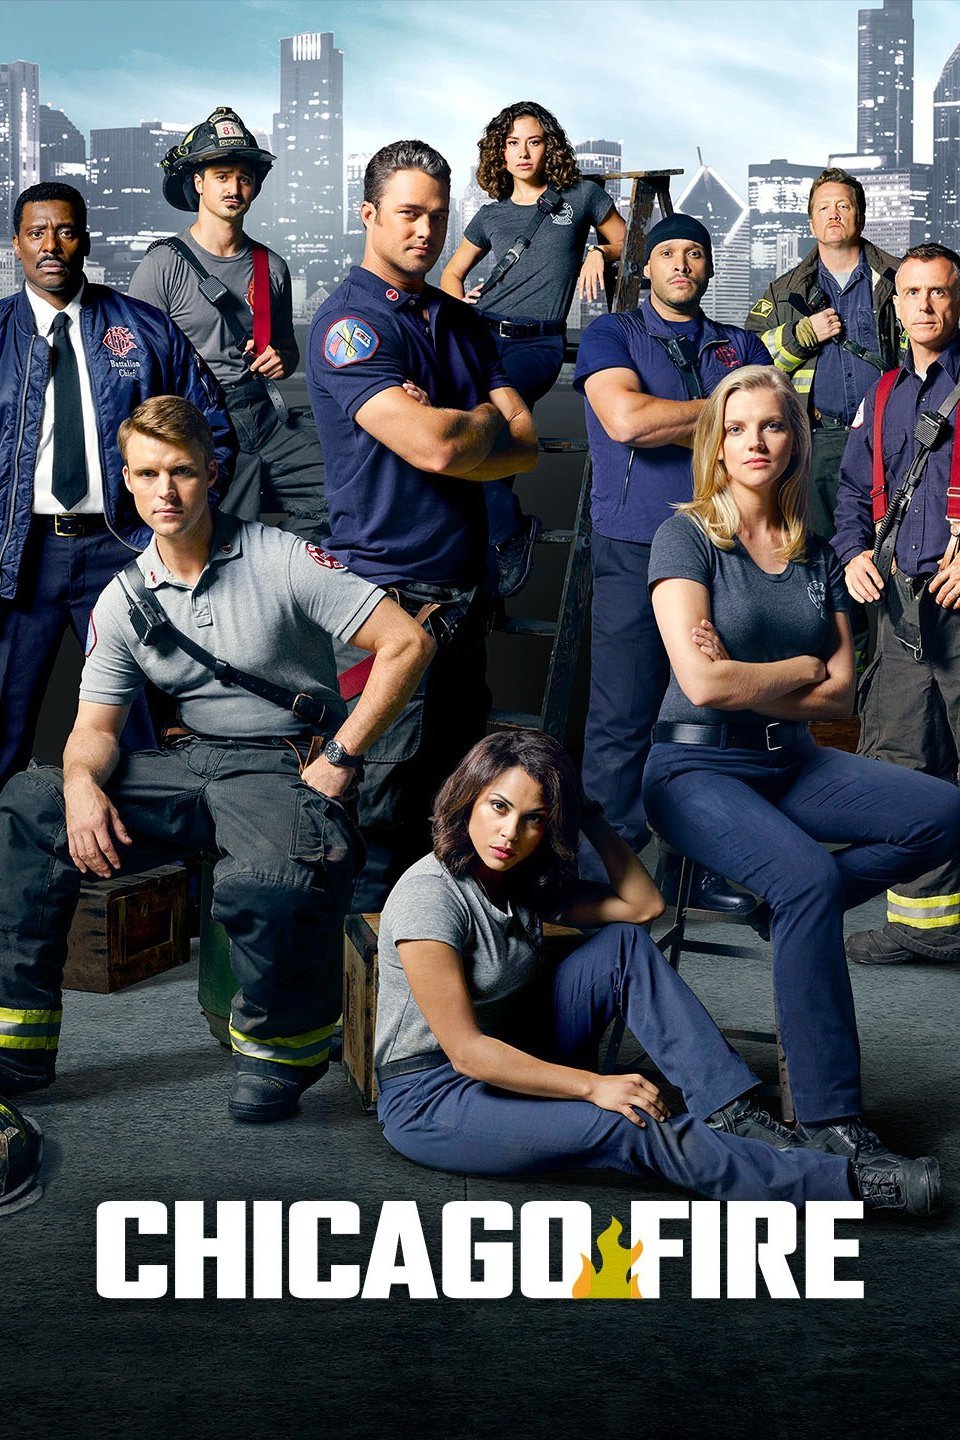 'Chicago Fire' Season 4 Episode 9 spoilers Severide learns of Serena's